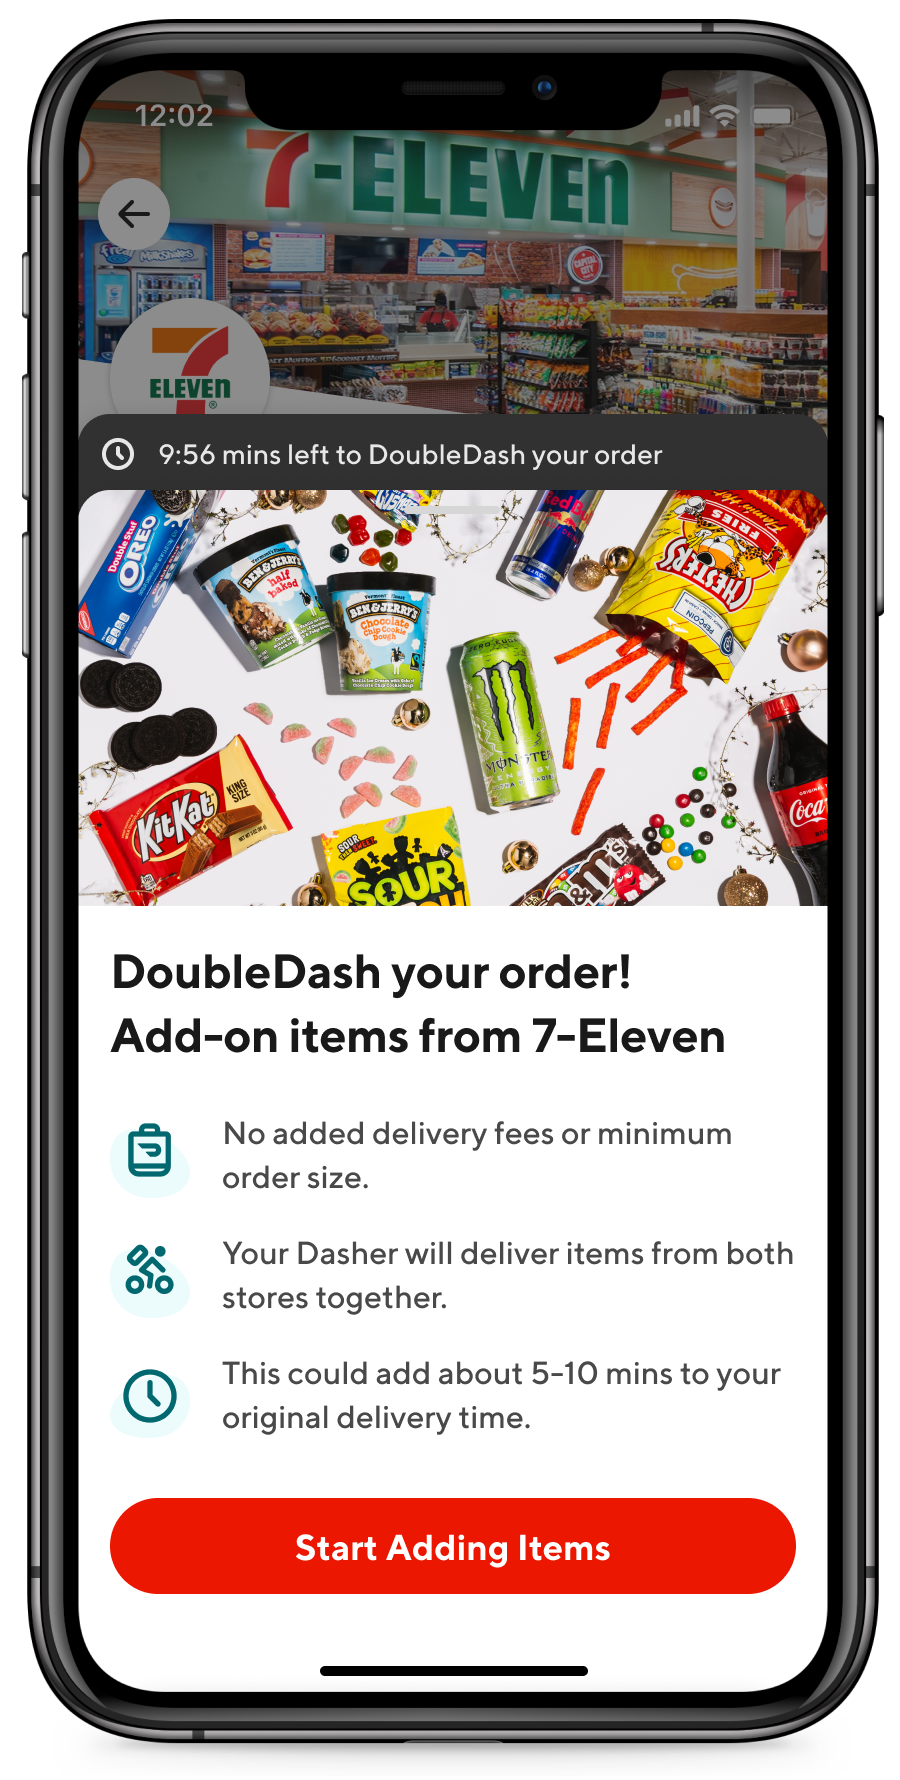 DoorDash lets delivery customers include products from multiple stores